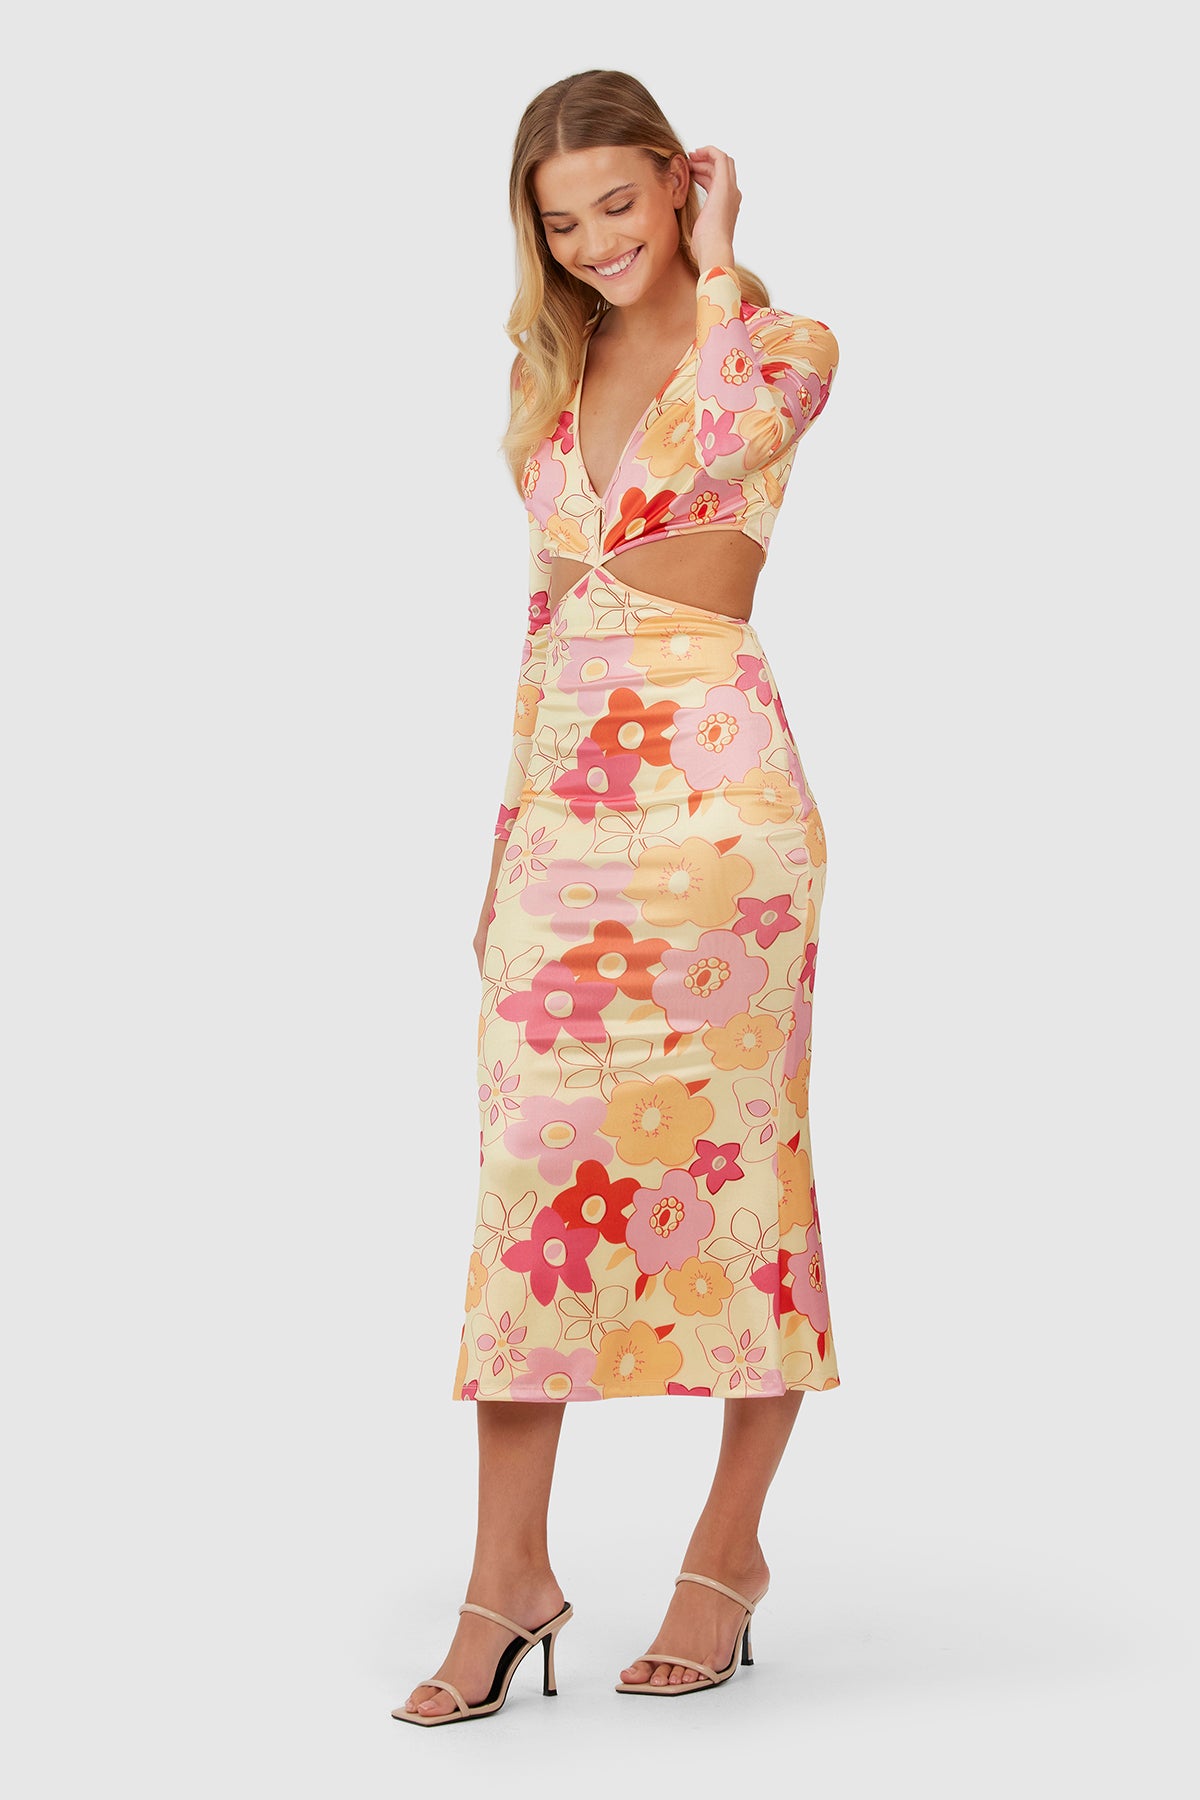 Finders - Goldie Midi Dress - Yellow Retro Floral